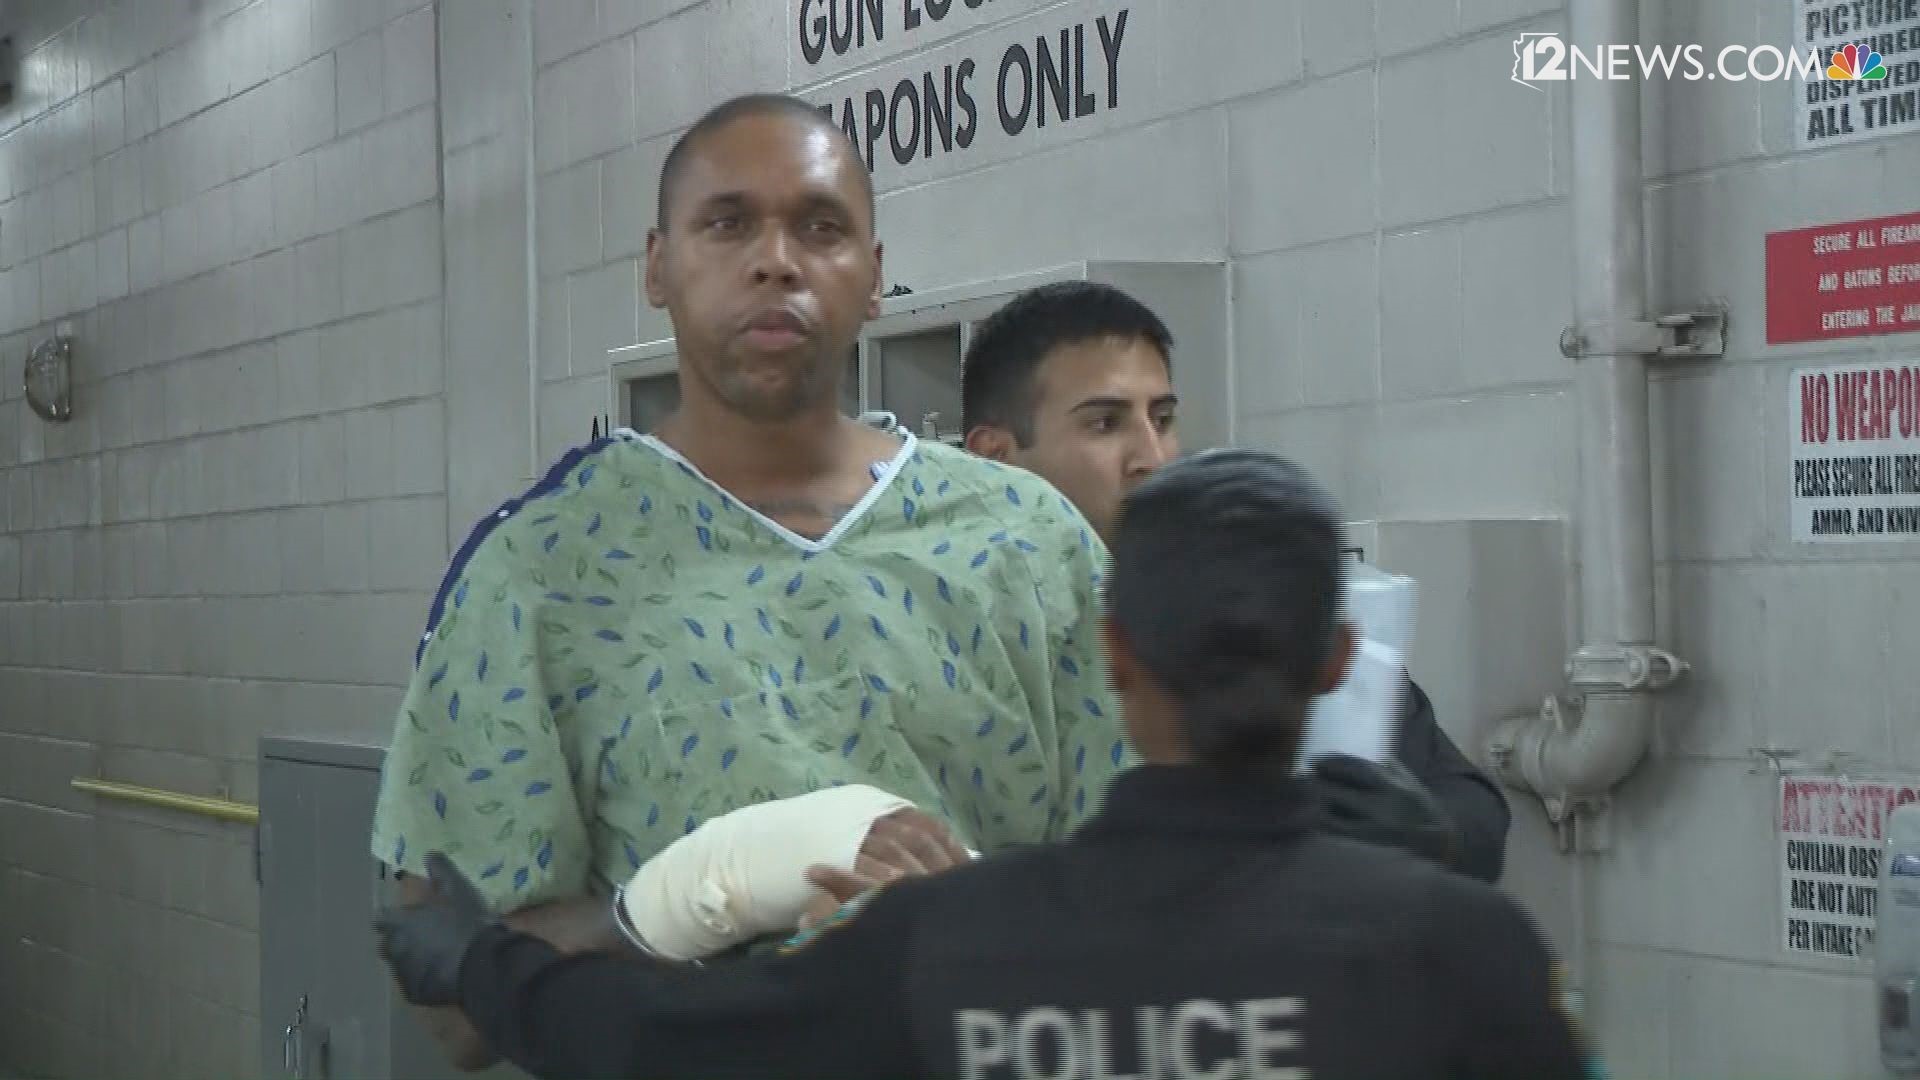 Julius Grant was released from the hospital on Wednesday and transported to 4th Avenue jail. He told 12 News, "I've been at this four years" as he went into the jail